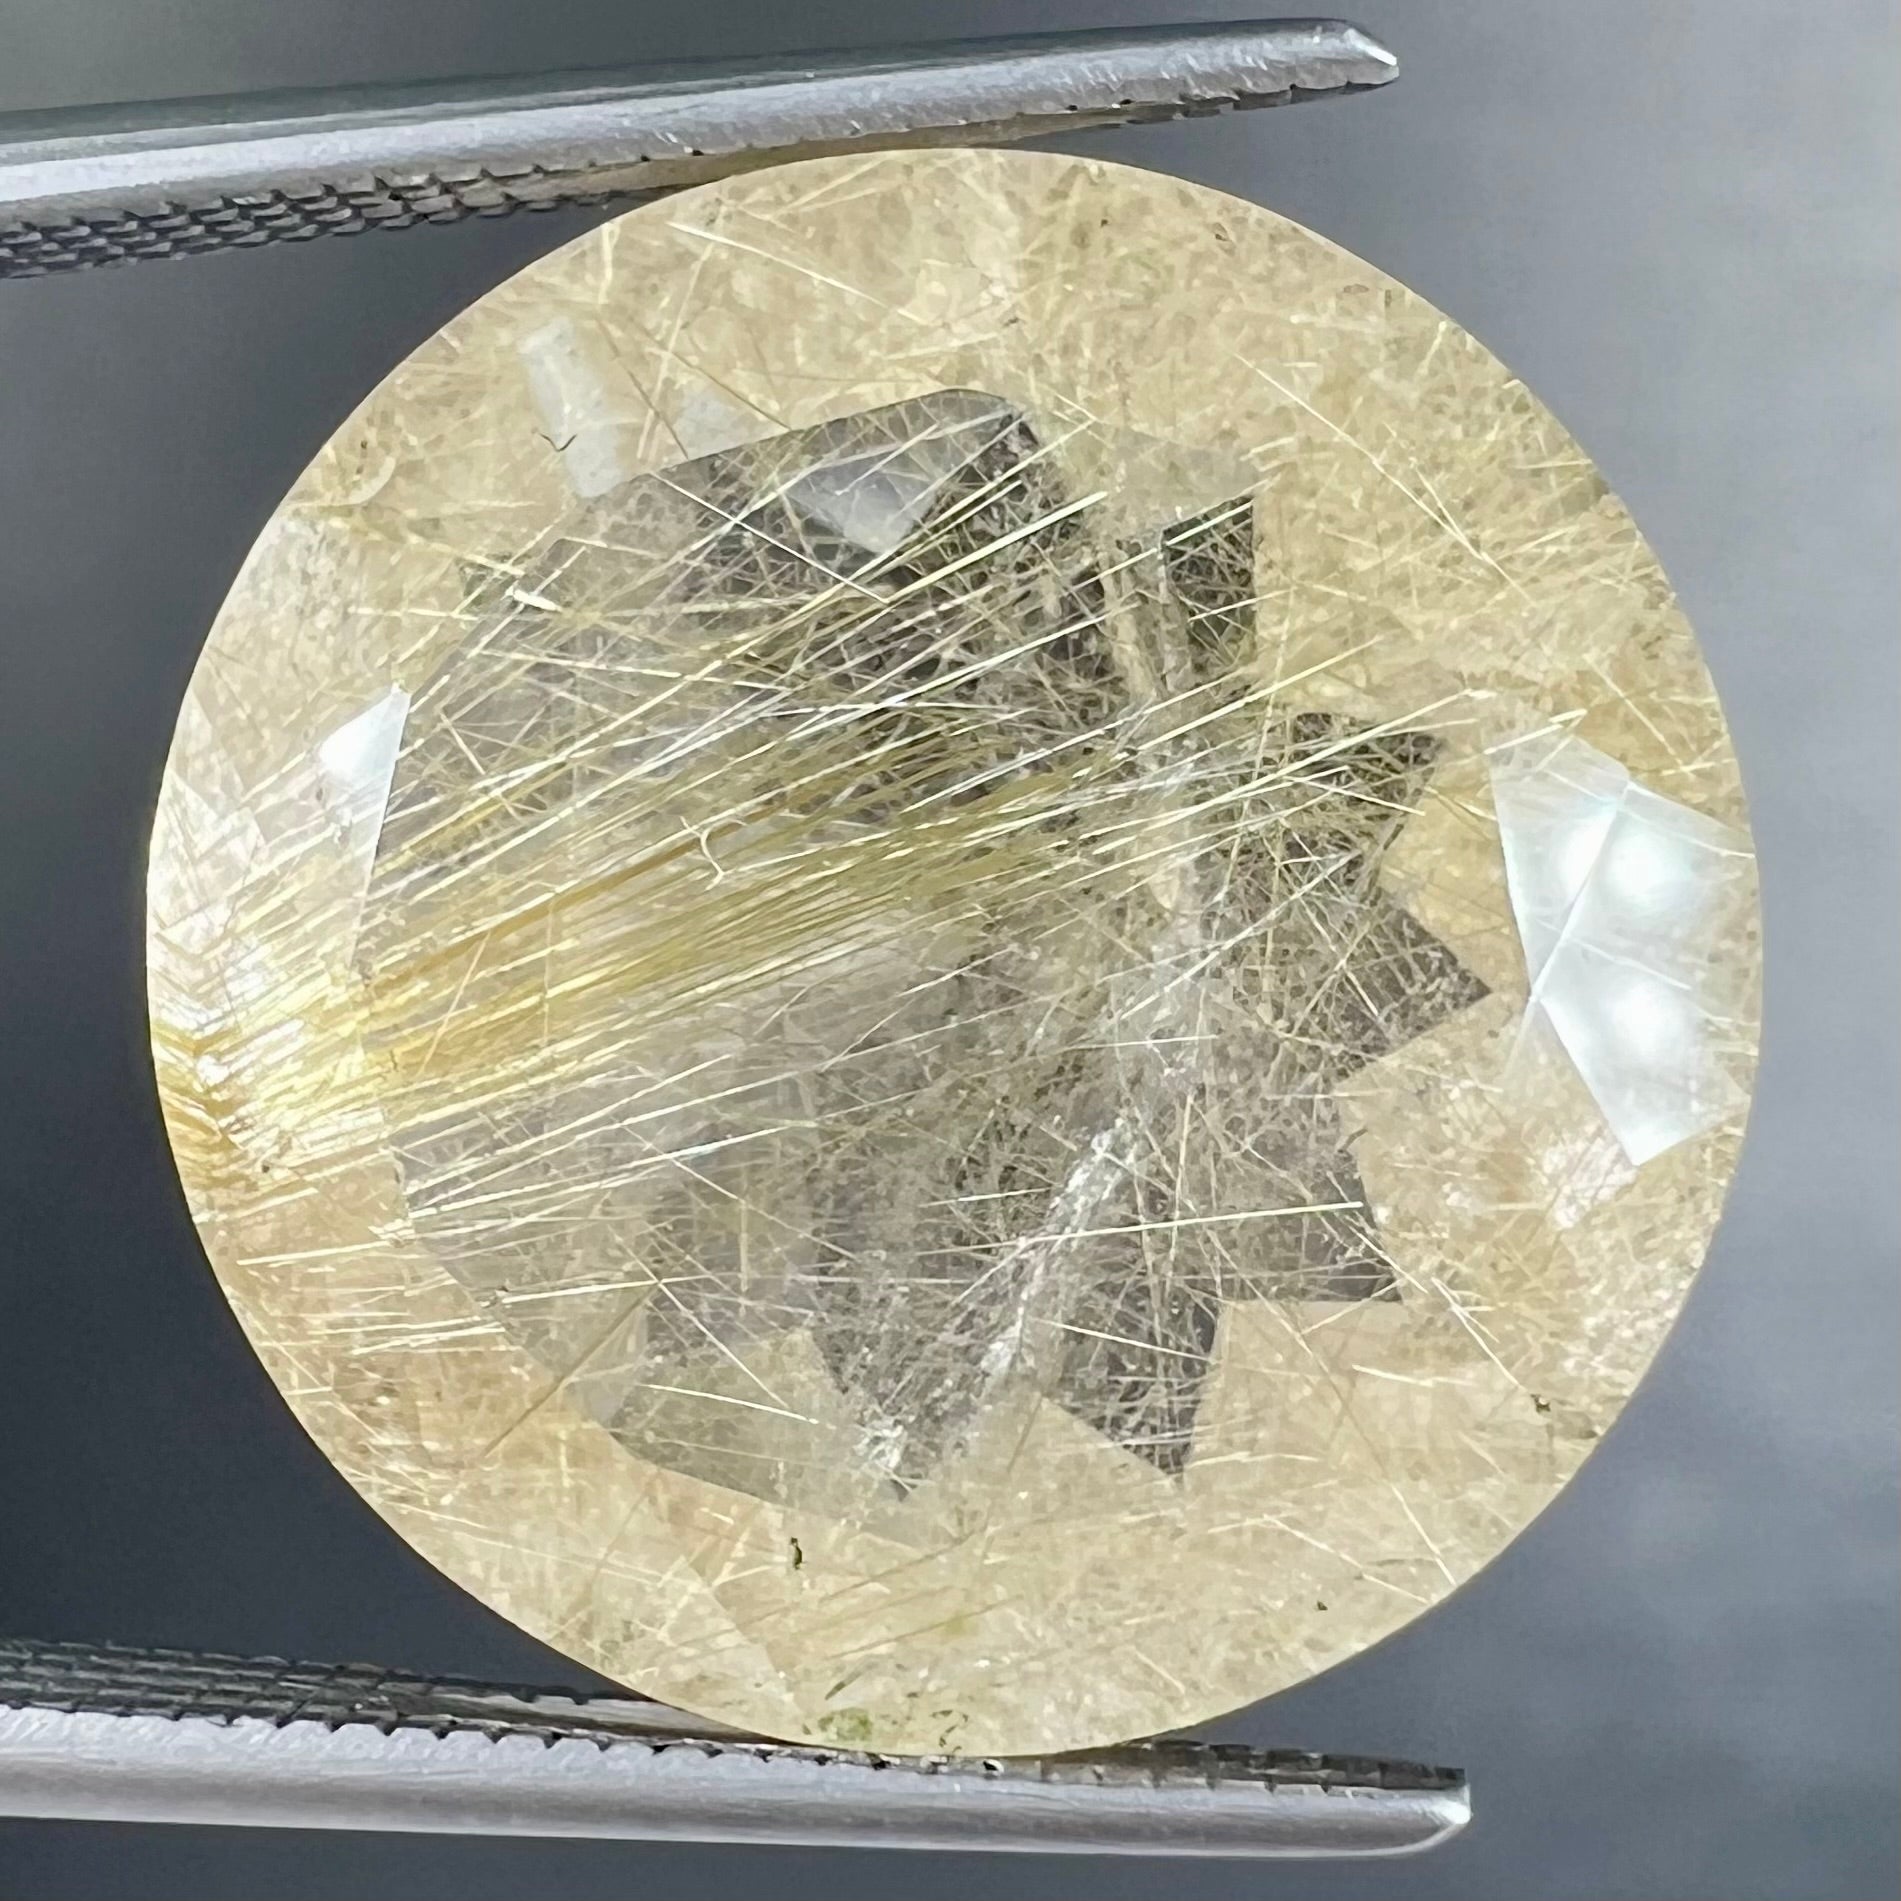 A loose, modified Early American round cut rutilated quartz gemstone.  The rutile inclusions are a golden color.